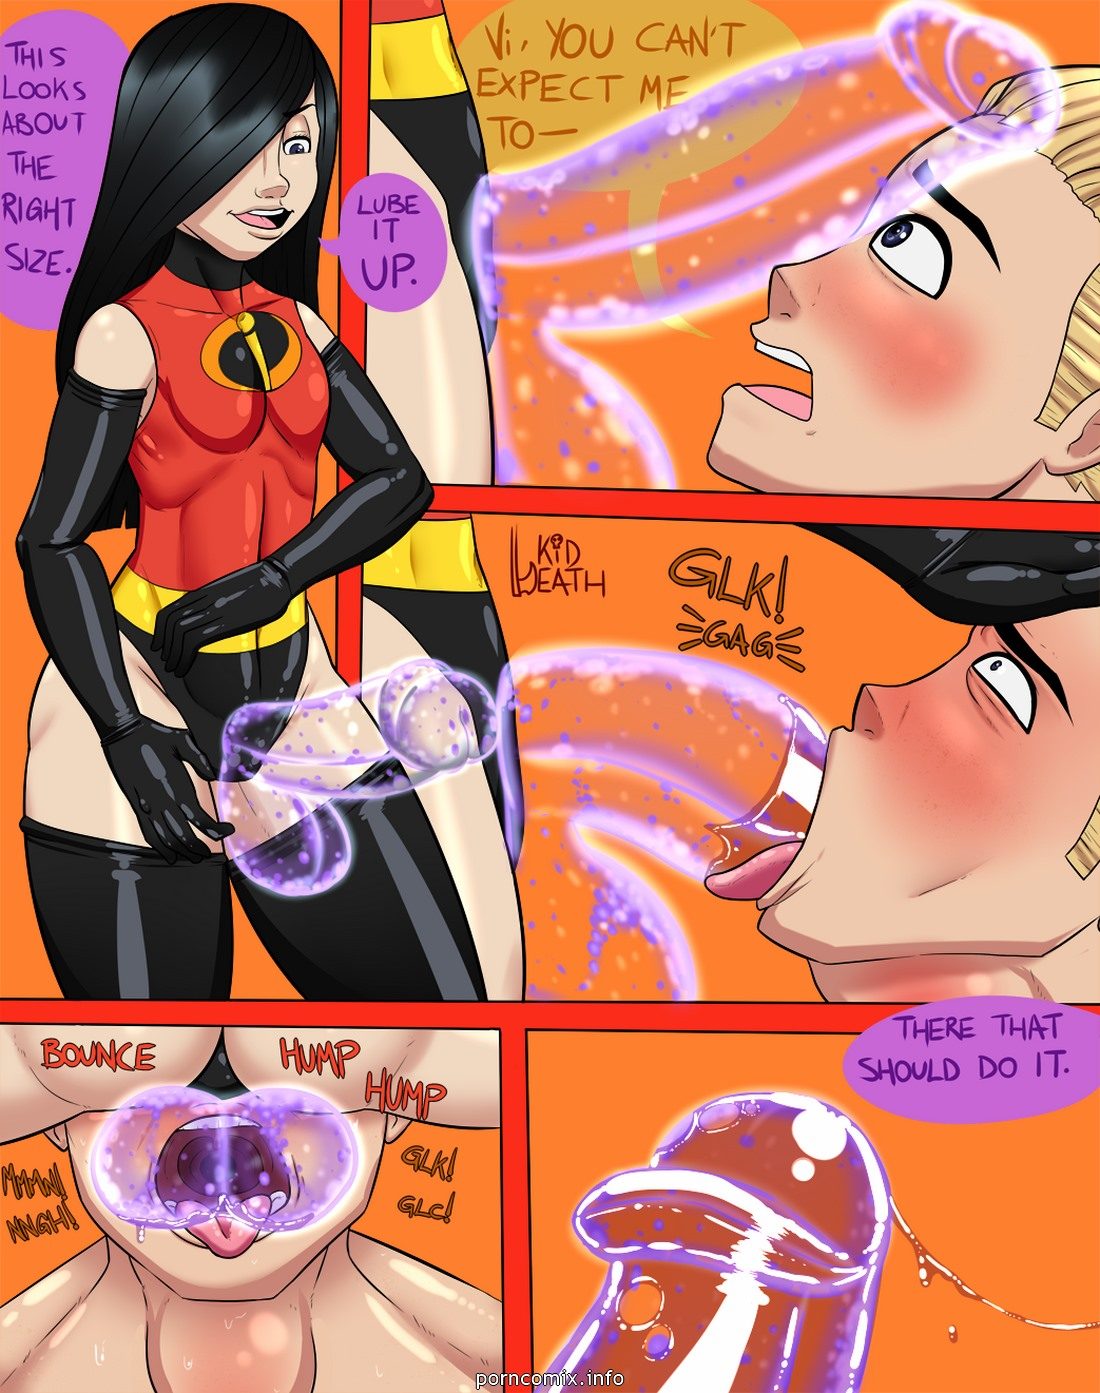 Incredibles Violet And Dash Characters - Incestibles: Forceful (The Incredibles) Kiddeathx - Comics Army